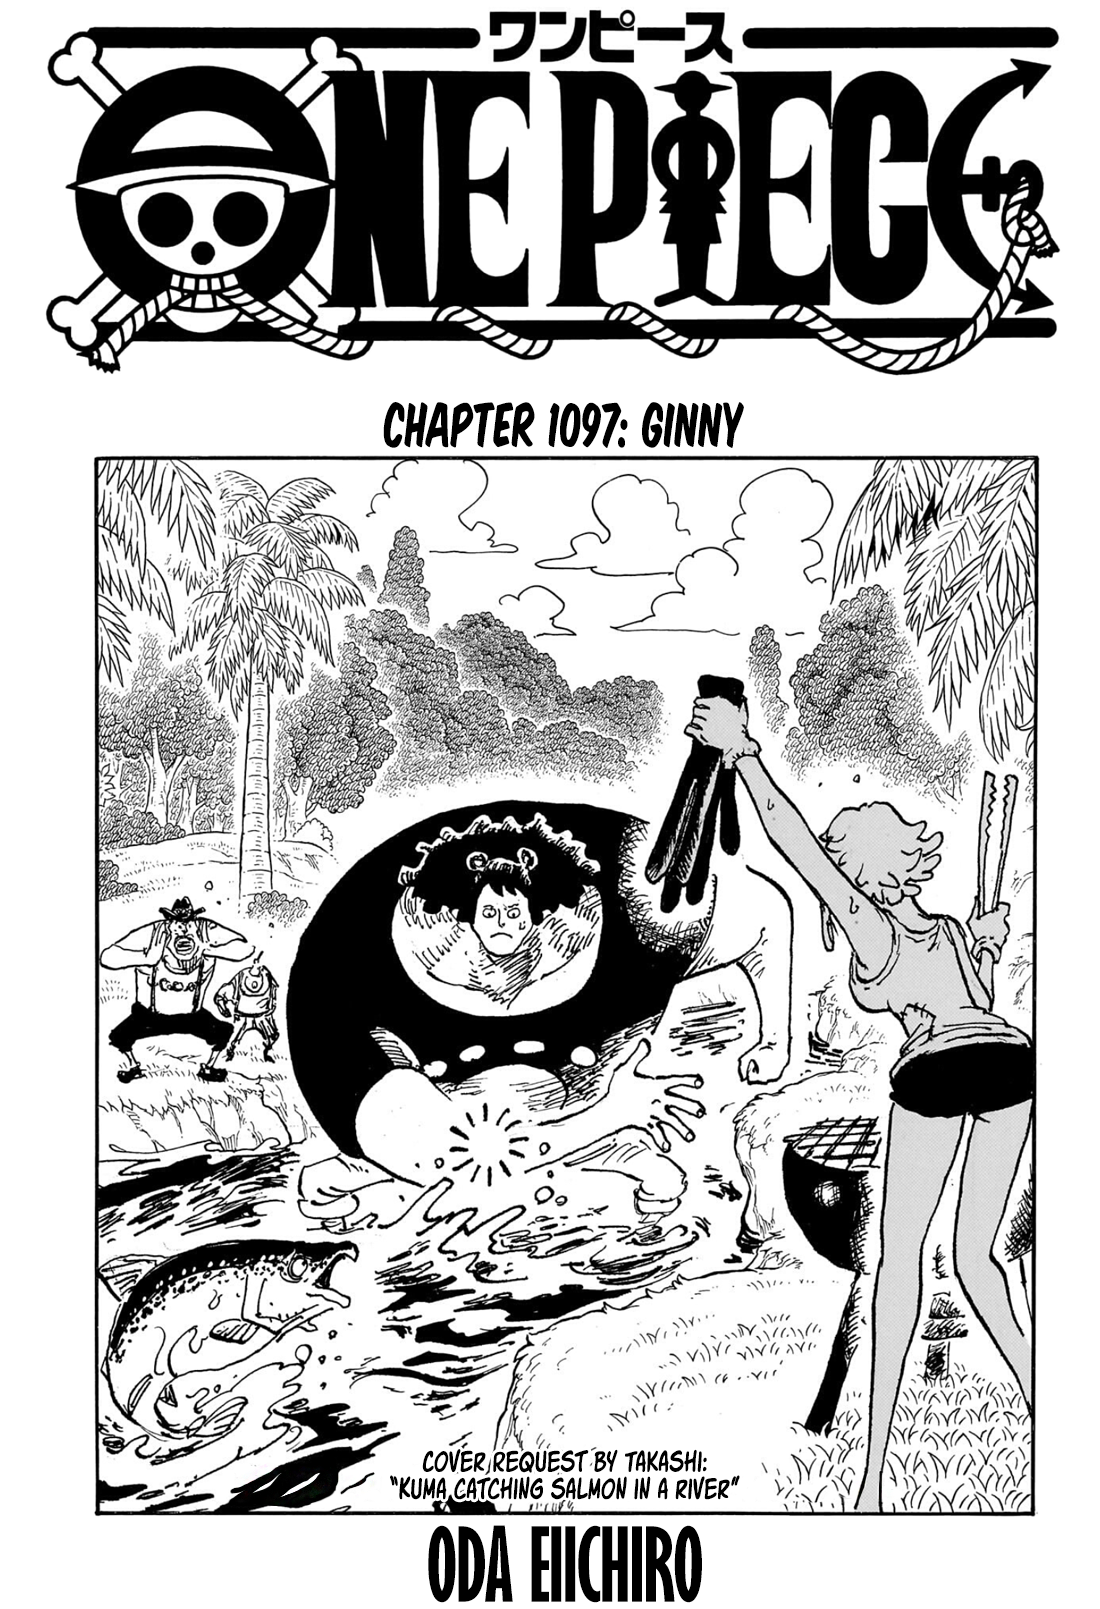 New One Piece Manga Chapter 1021 (full scans) - sS YOU THINK THAT